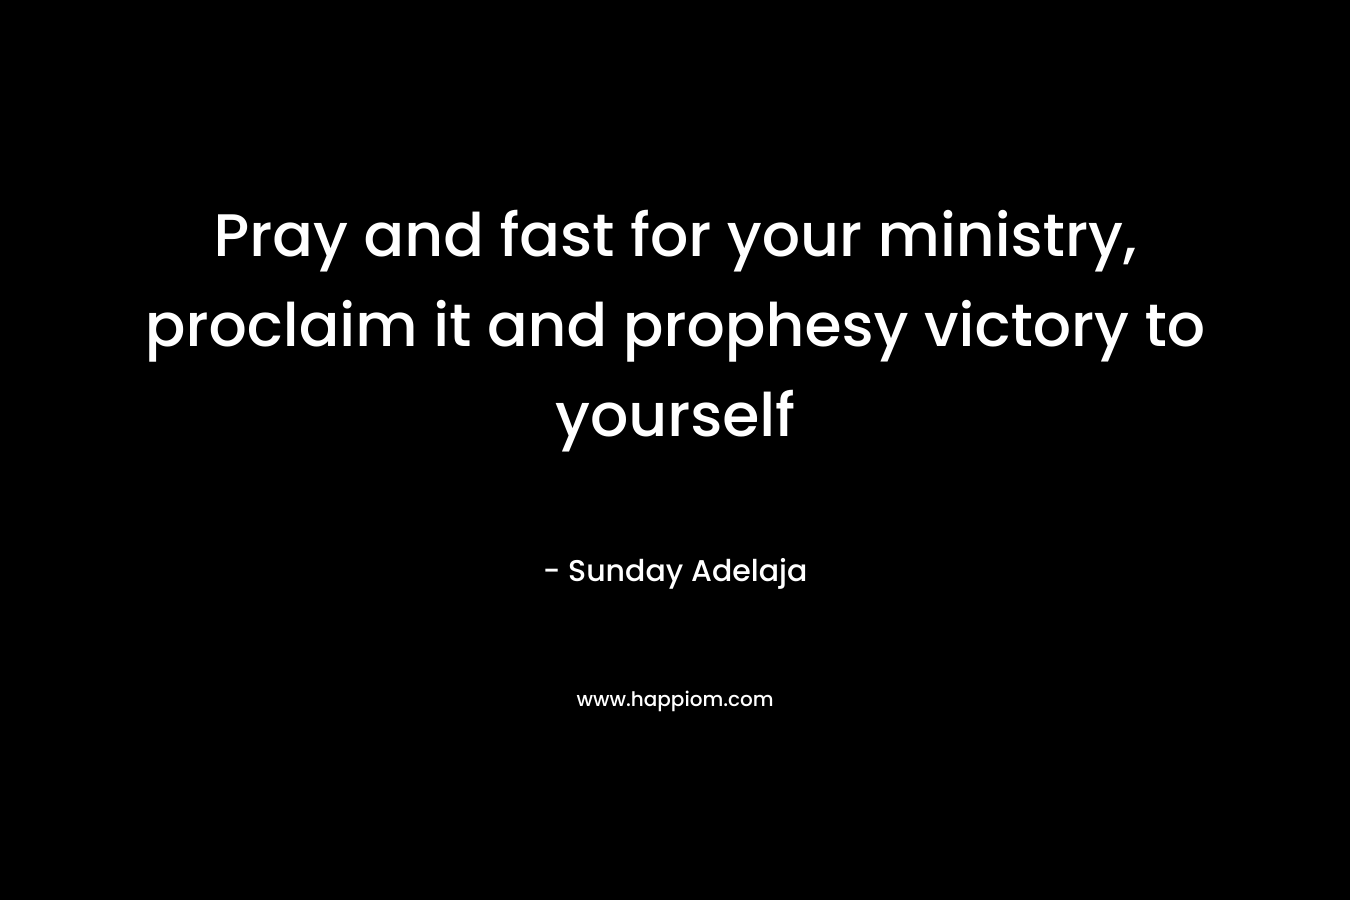 Pray and fast for your ministry, proclaim it and prophesy victory to yourself